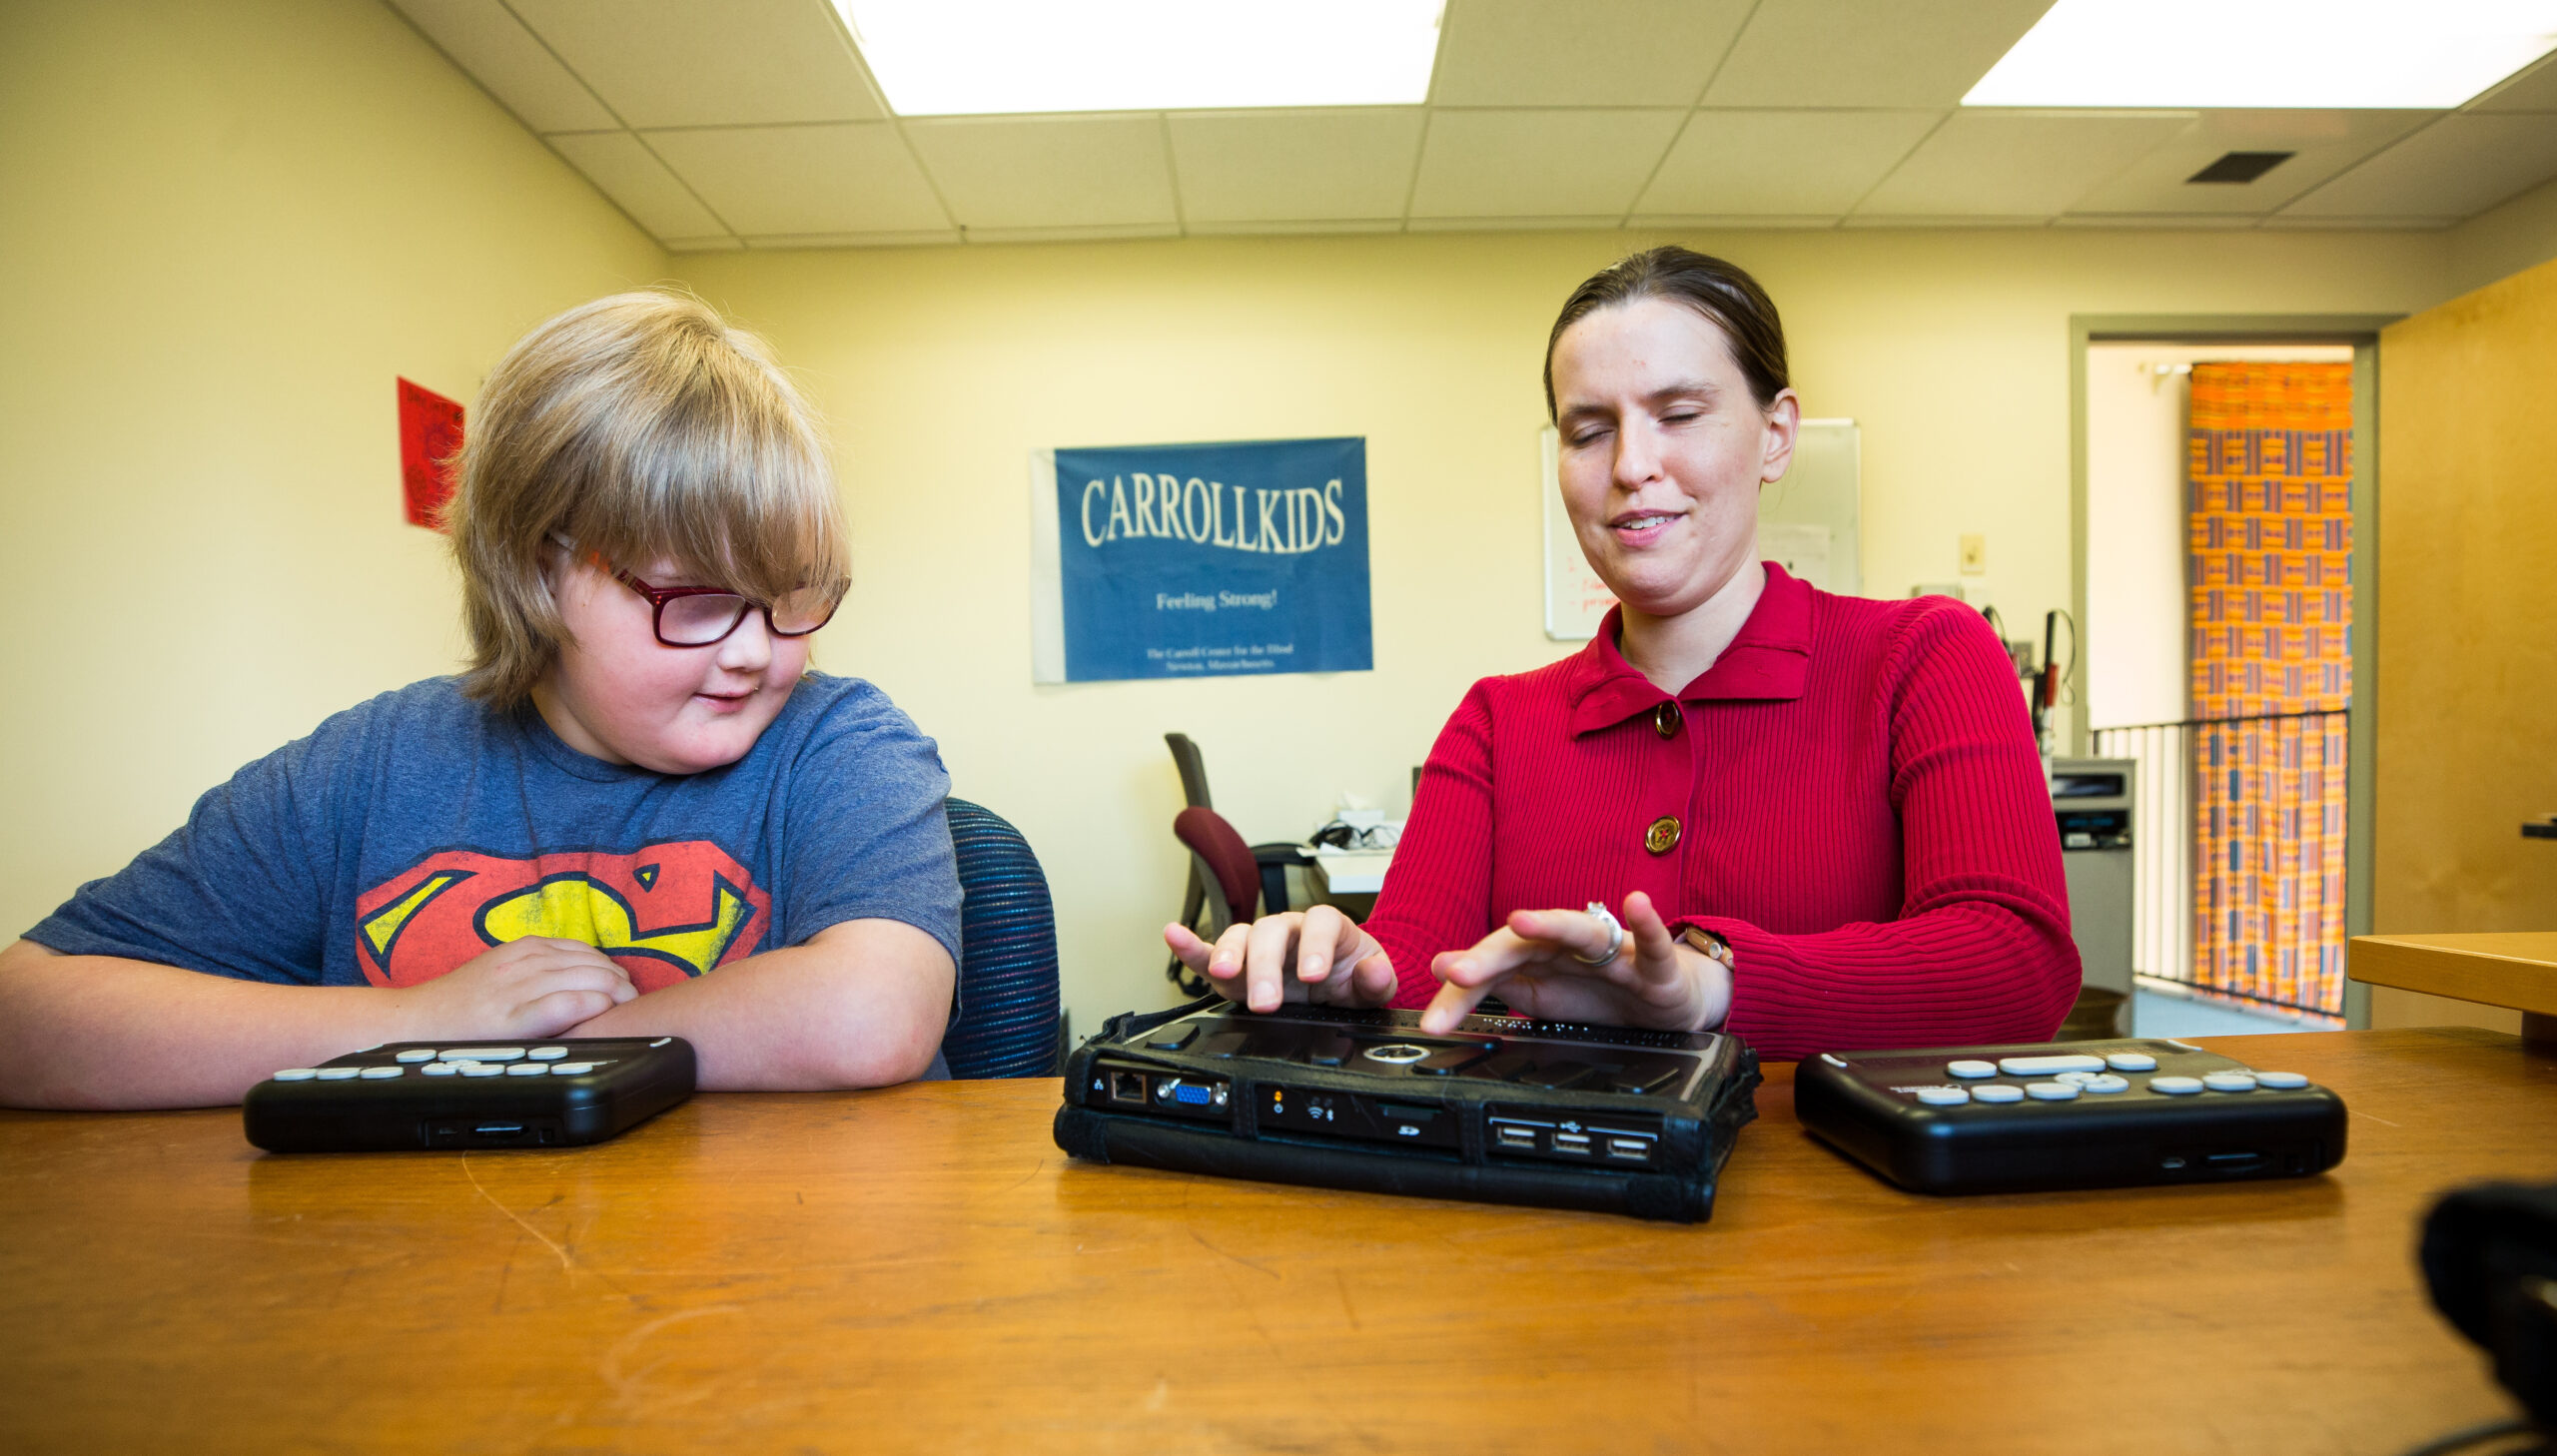 Woman demonstrates braille devices to child